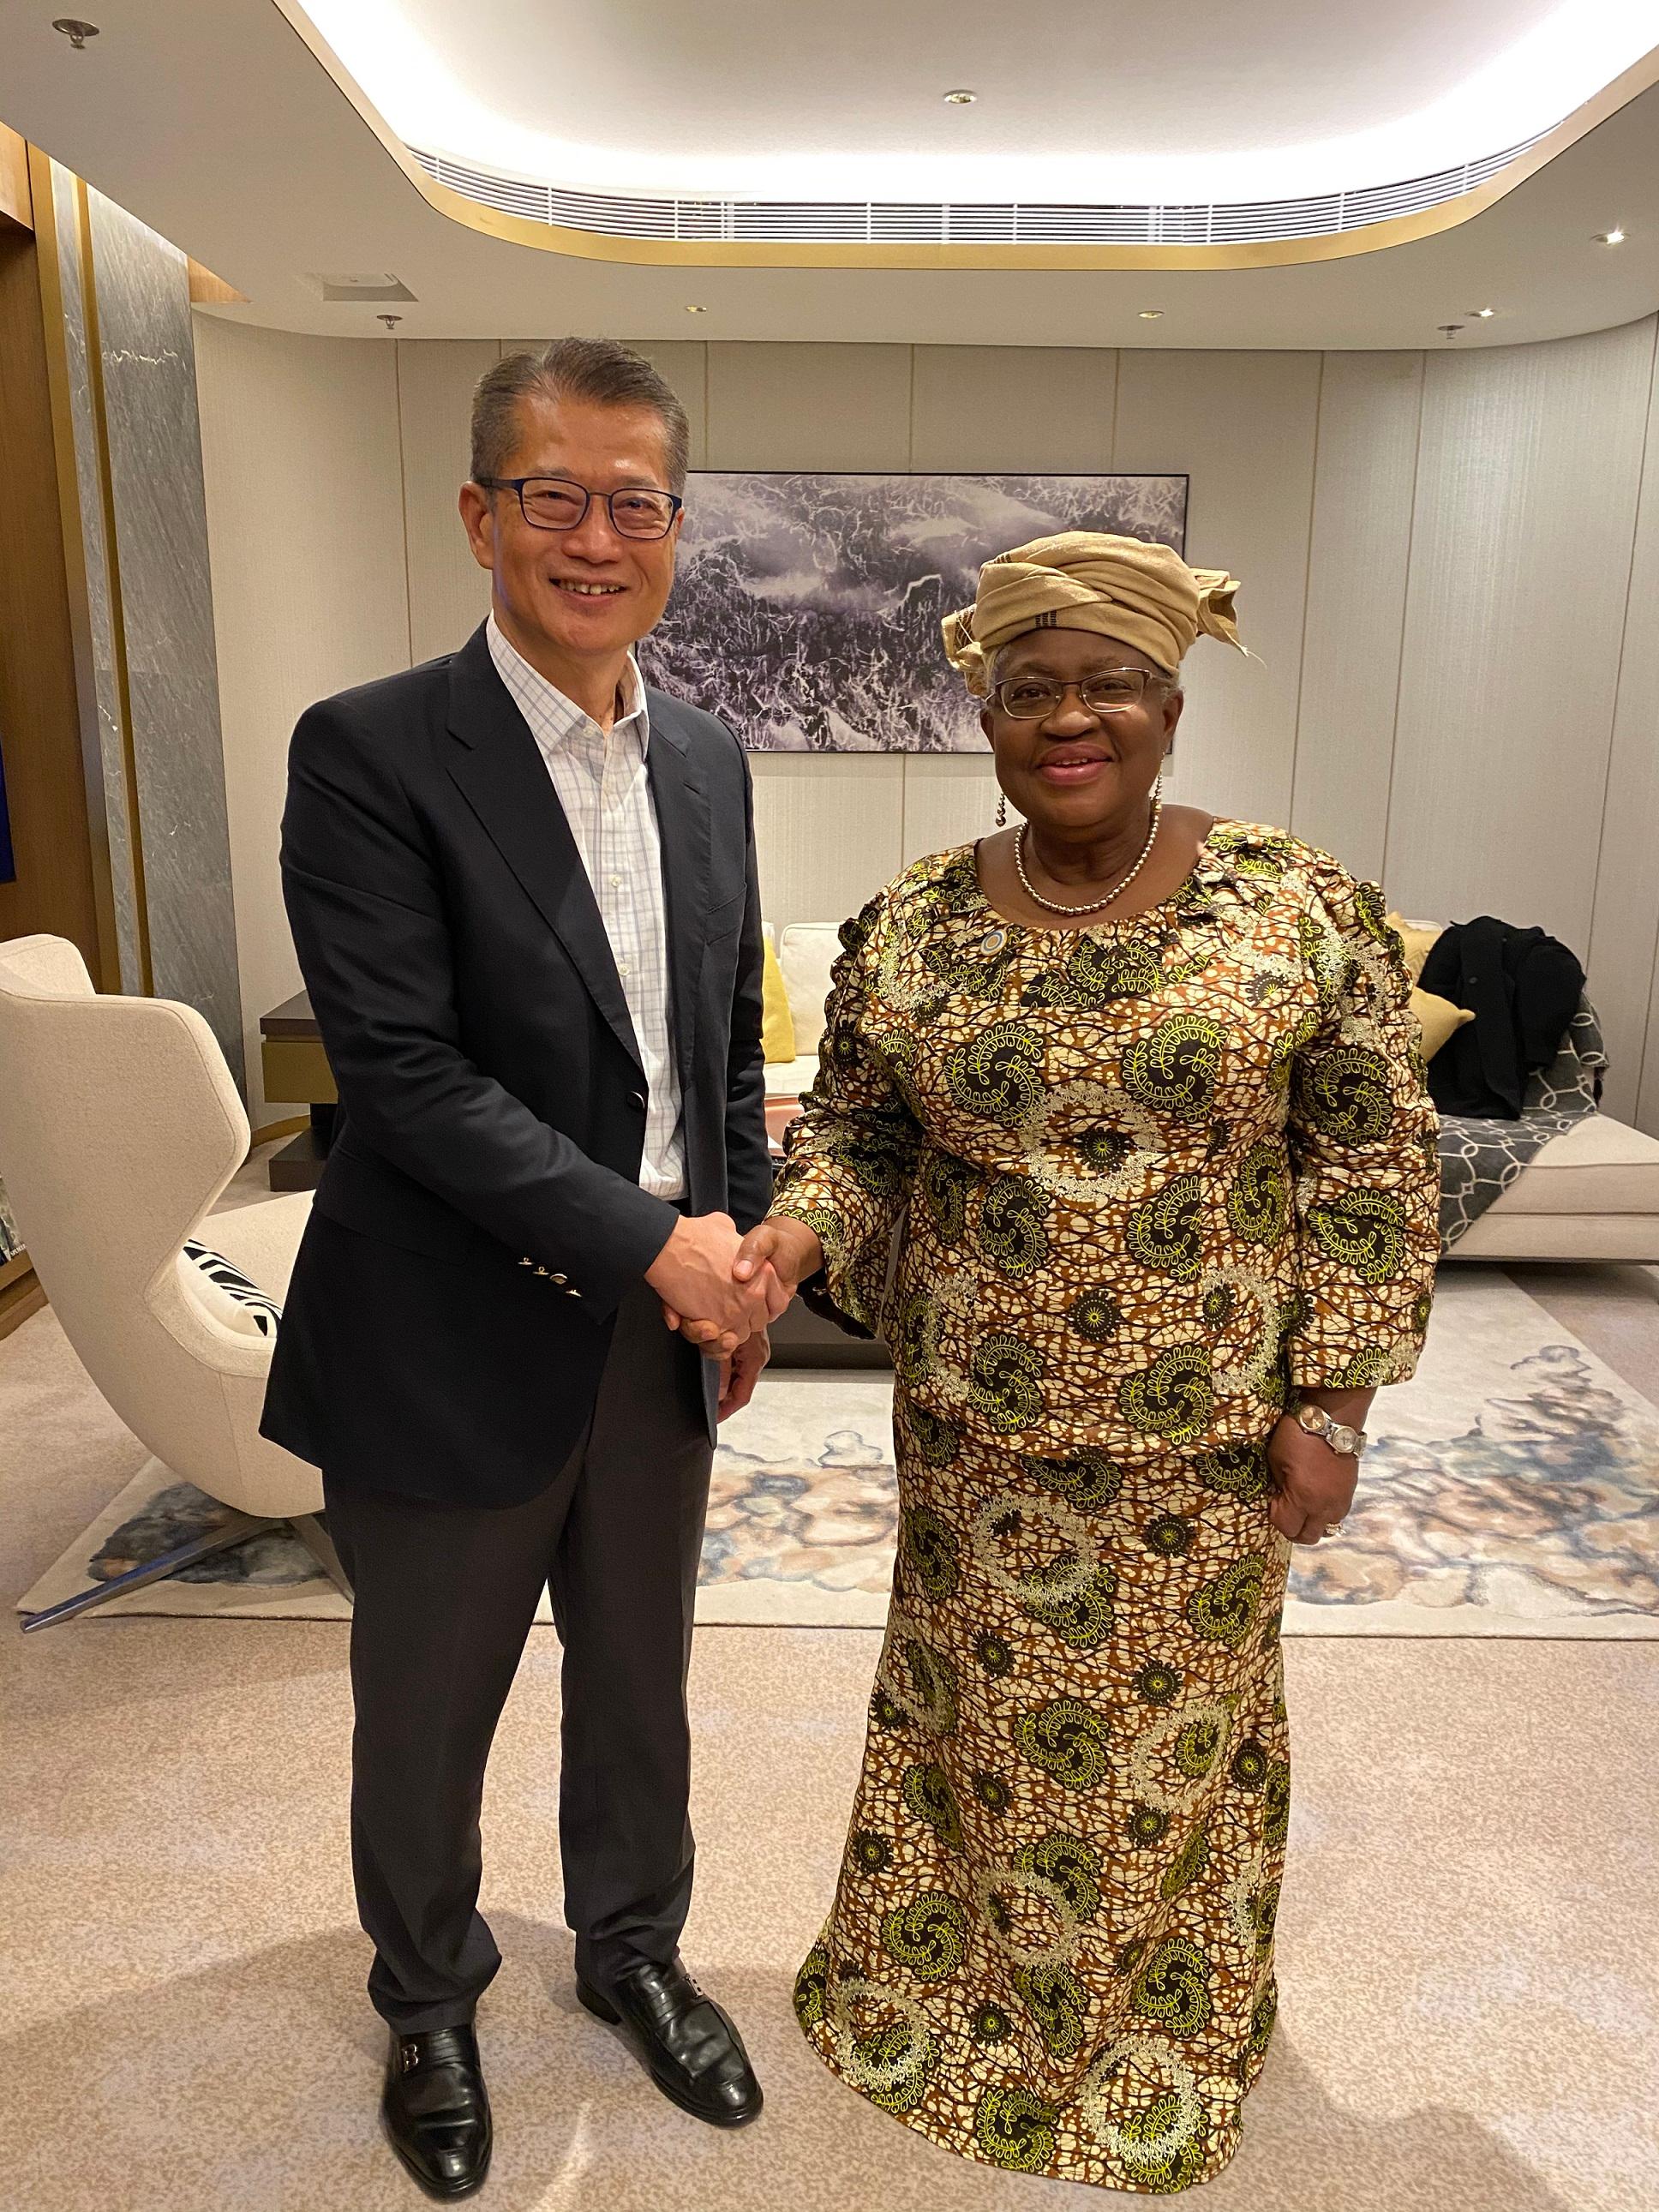 The Financial Secretary, Mr Paul Chan, meets with the Director-General of the World Trade Organization, Dr Ngozi Okonjo-Iweala, today (December 10).